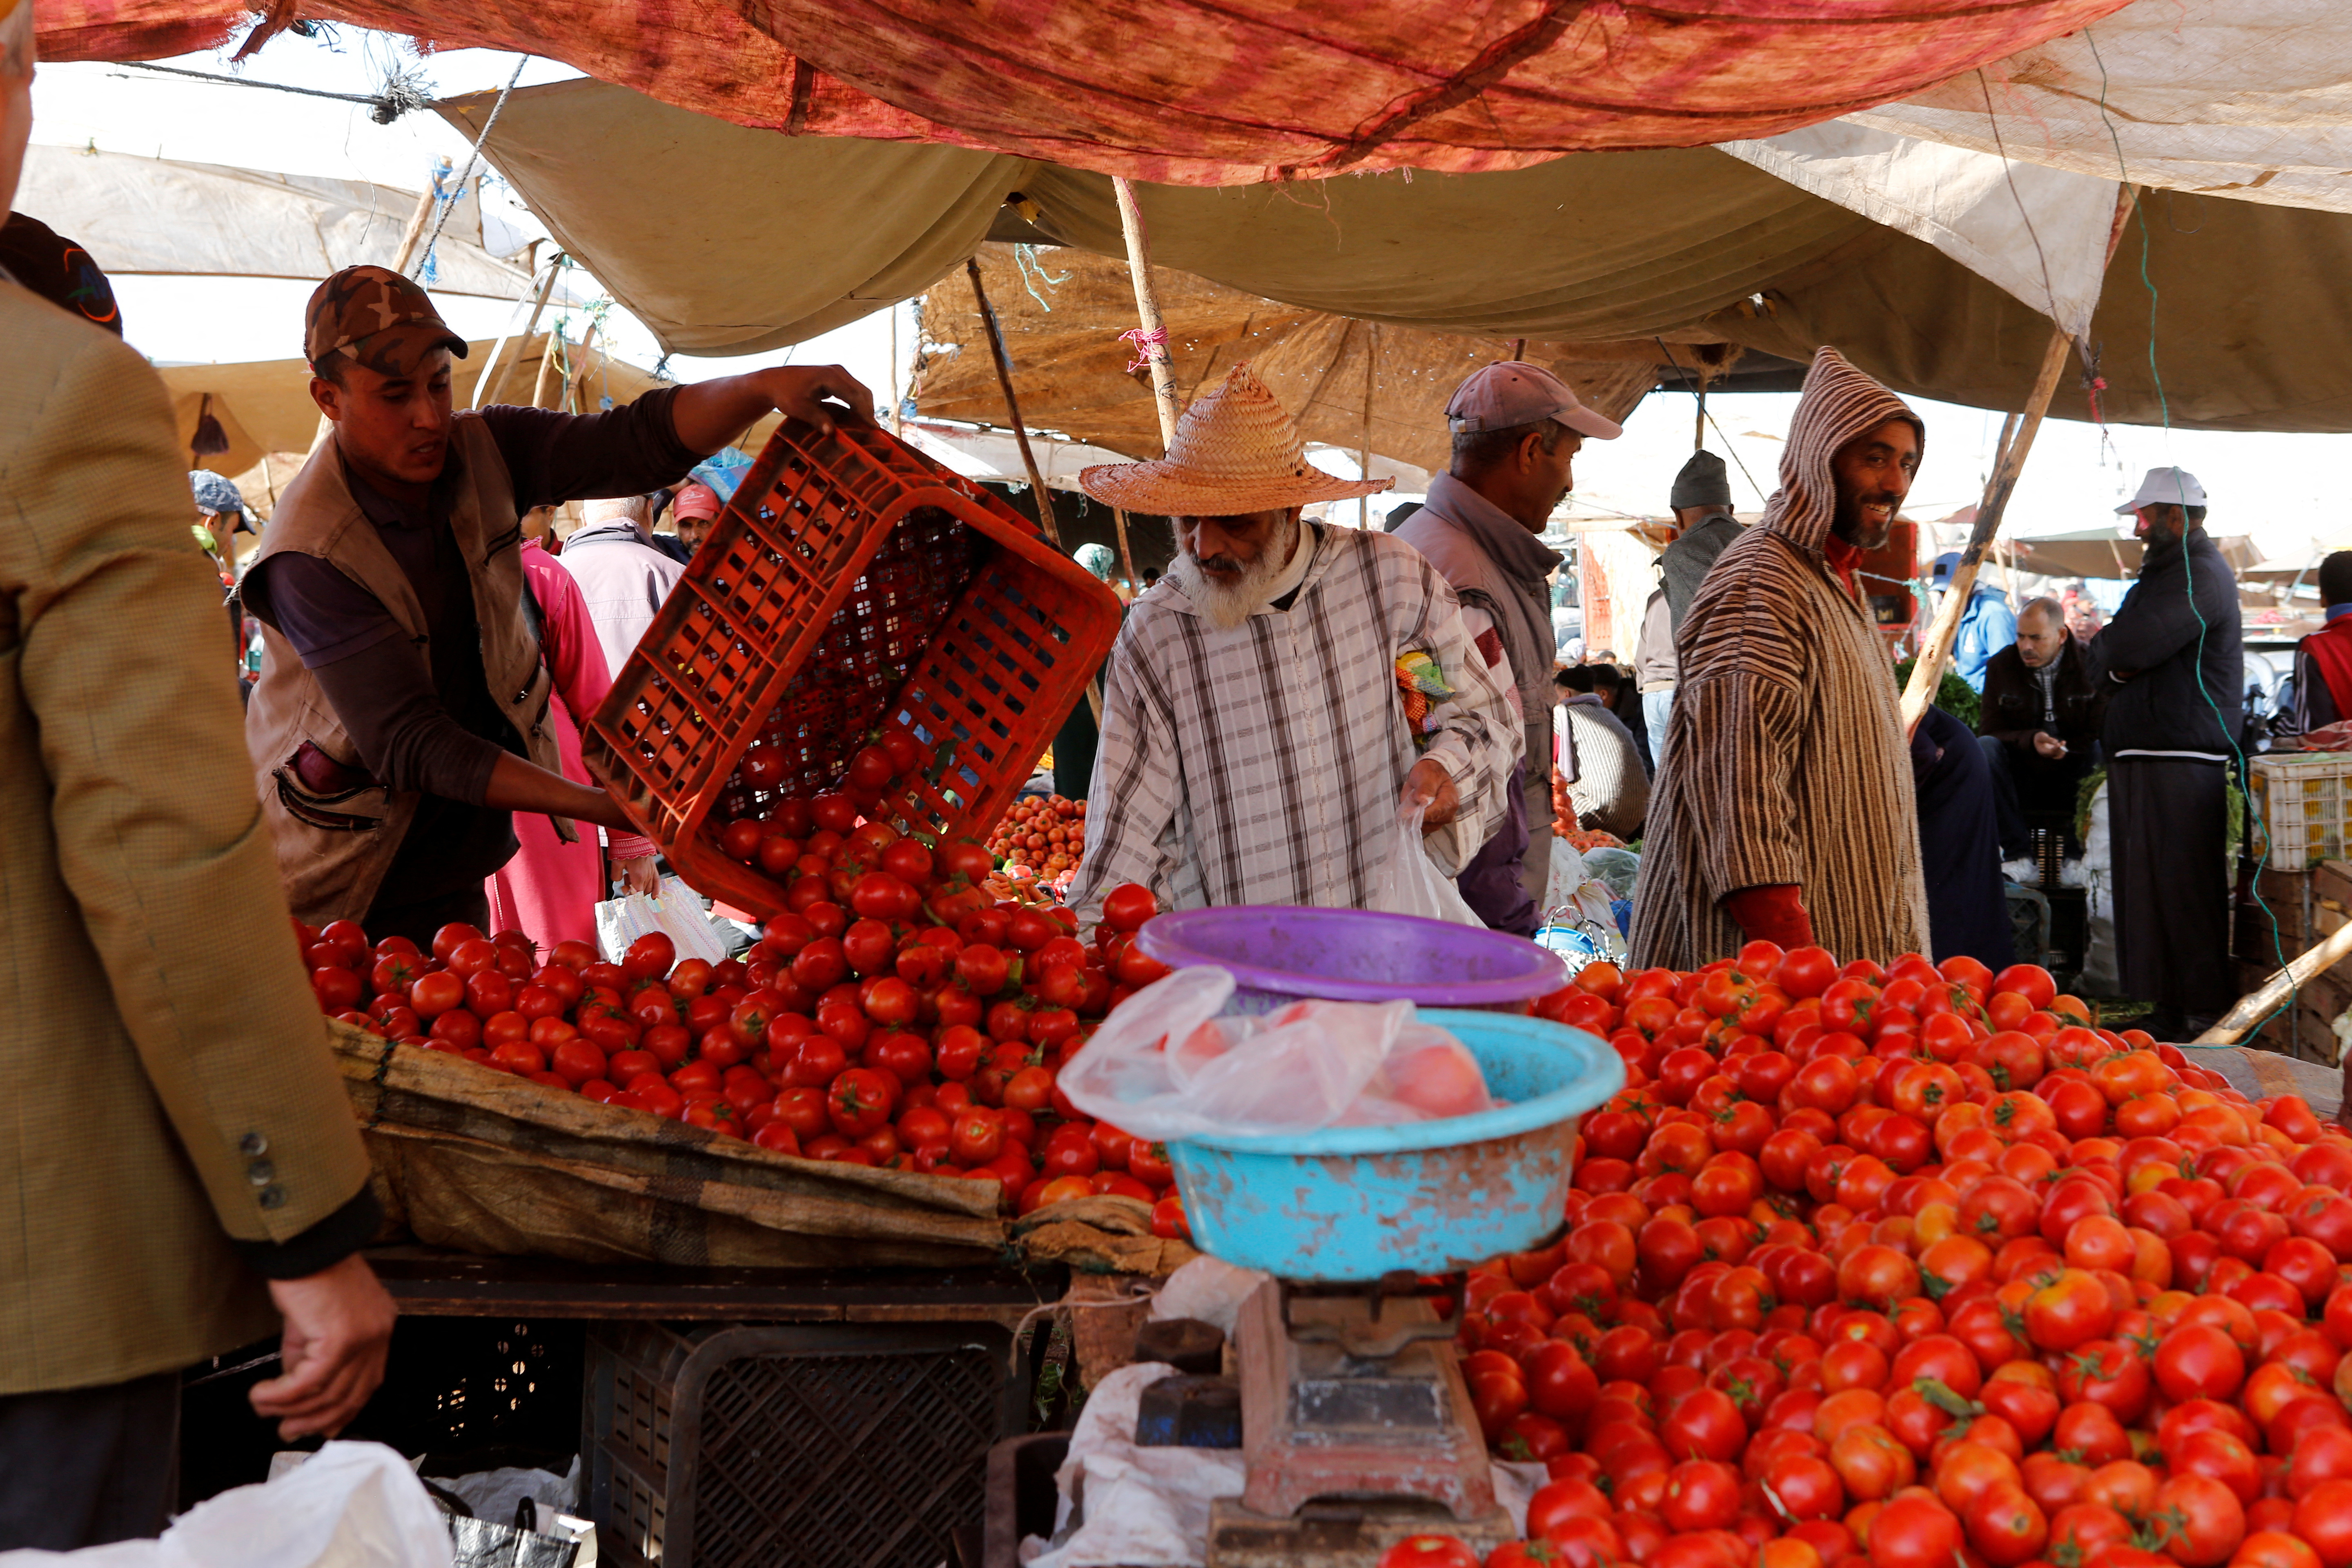 People shop at a vegetable market on the outskirts of Casablanca